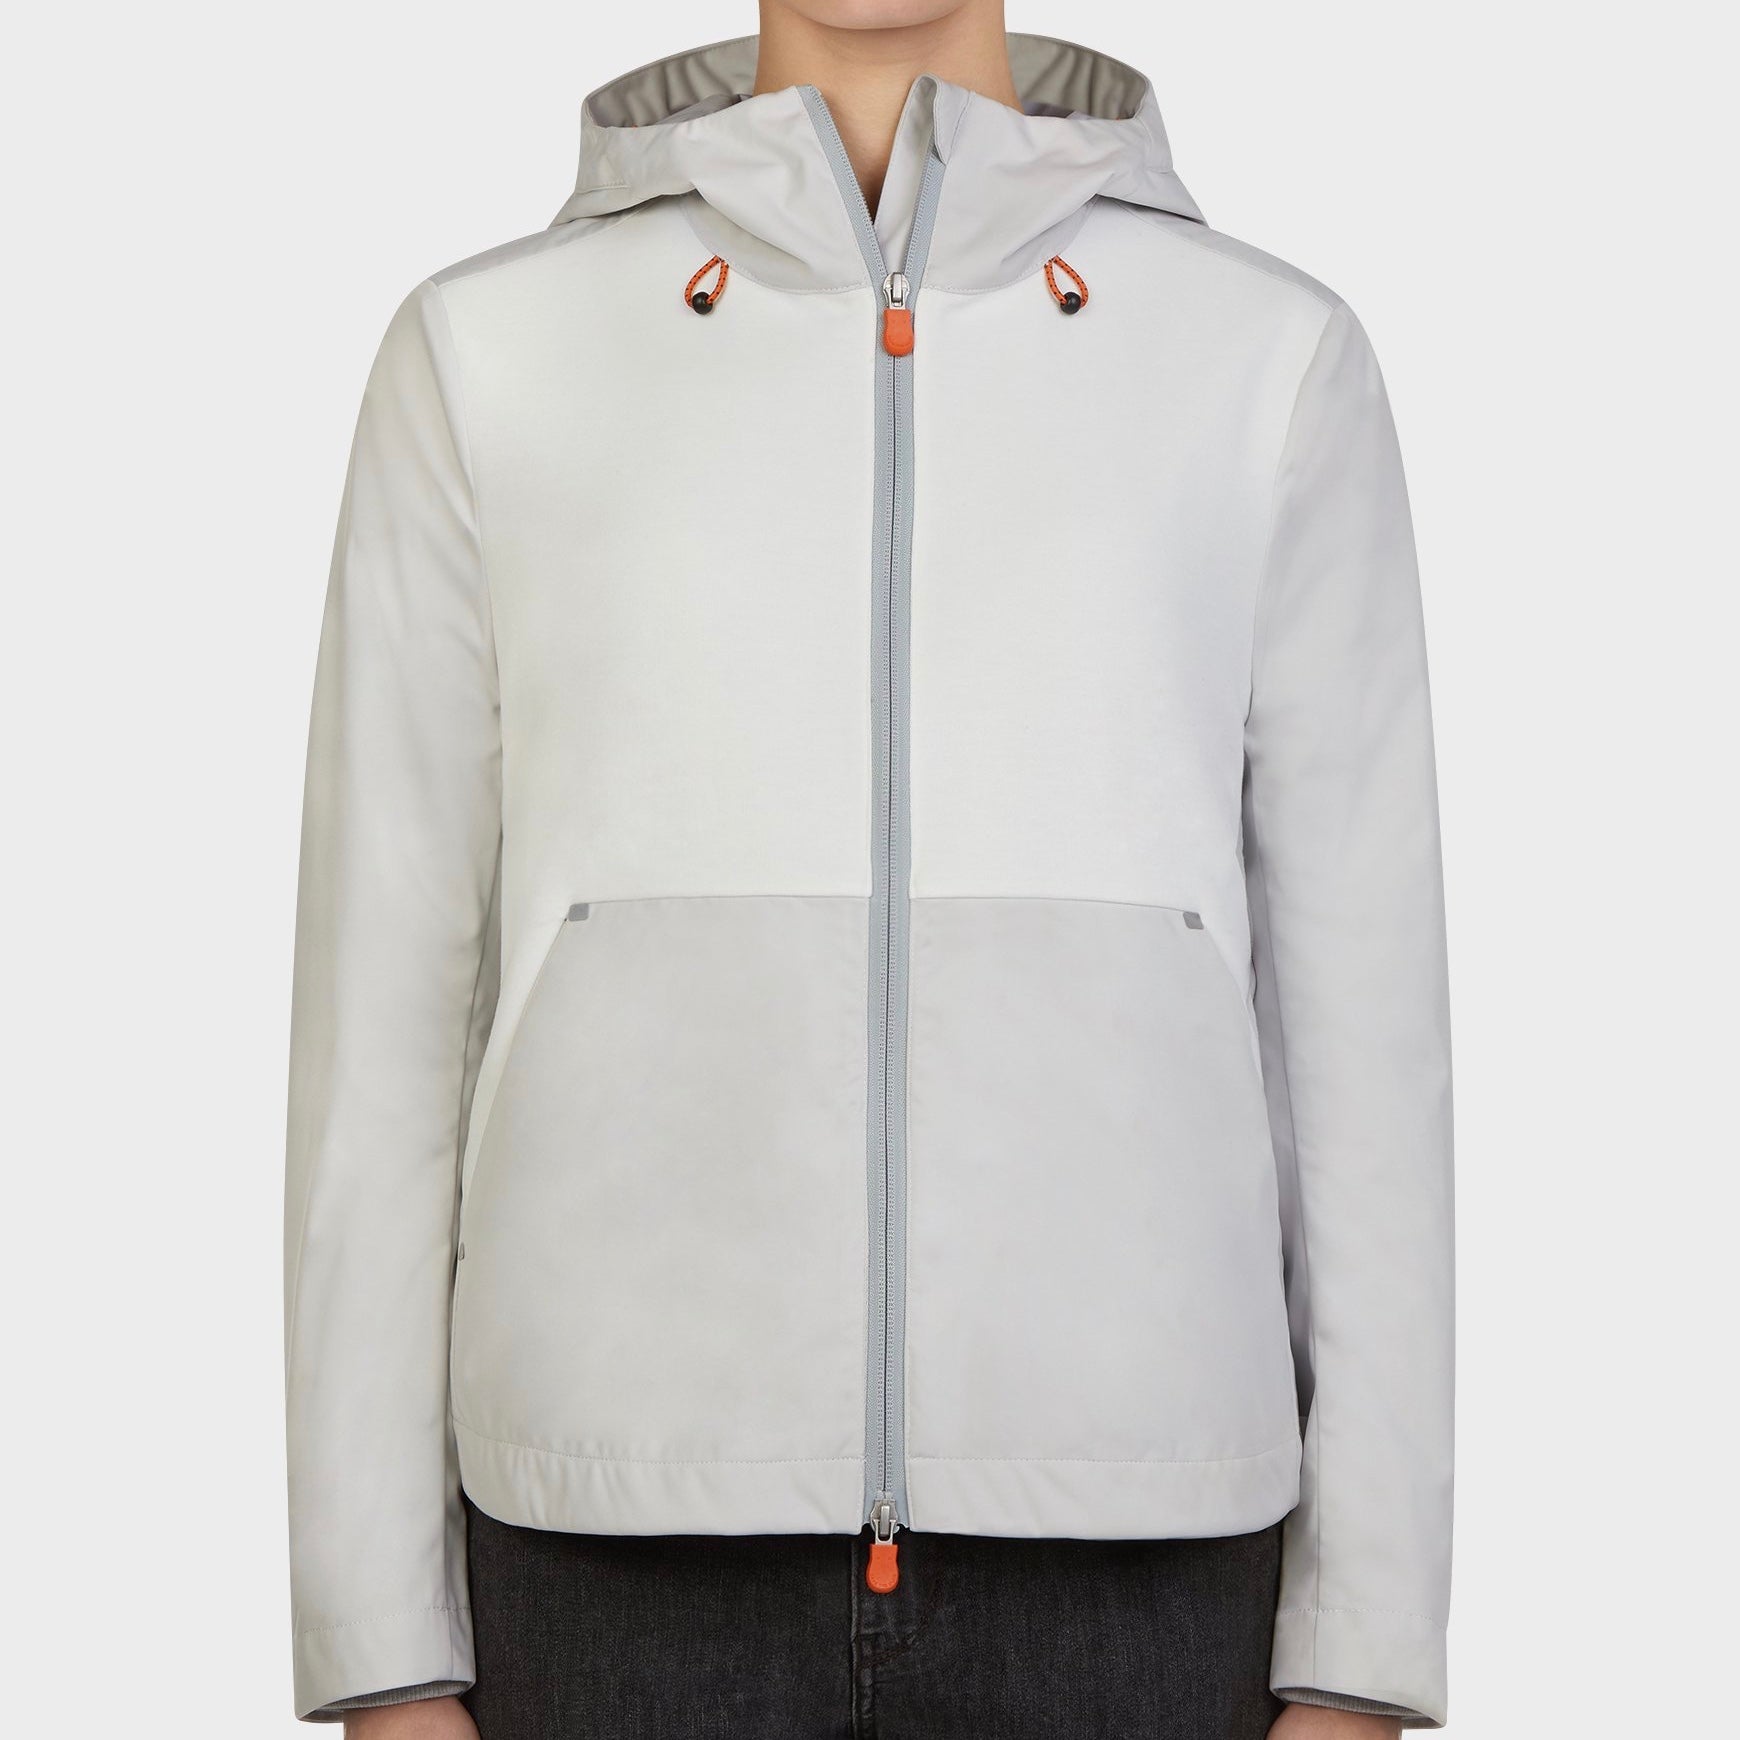 Women's Hooded Jacket - Coconut White - The Grinning Goat